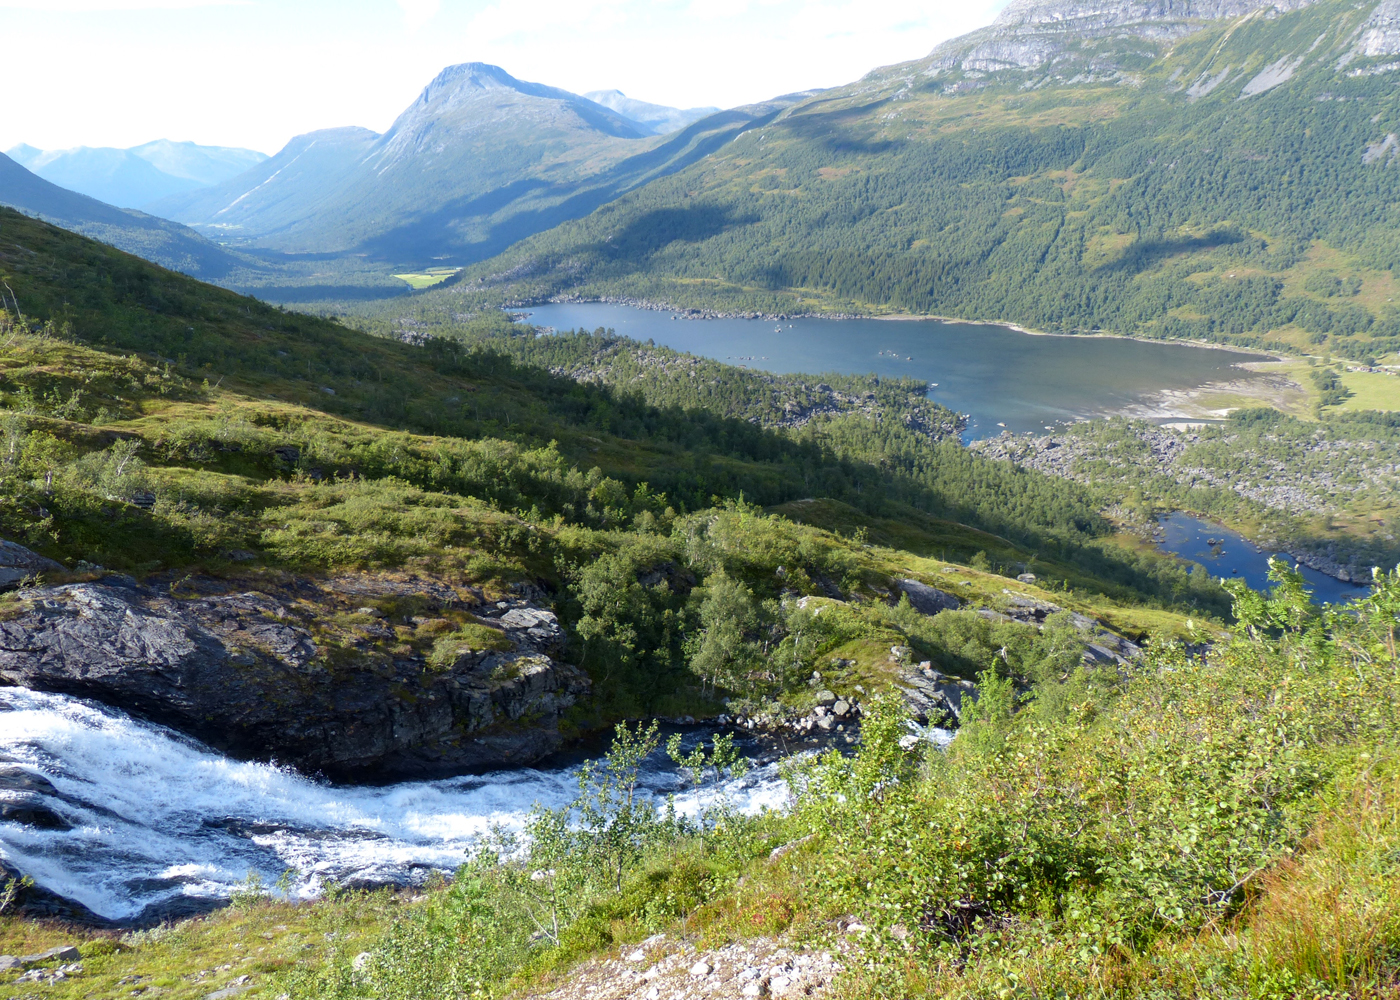 Hiking the Wild Mountains of Central Norway - Sierra Club 